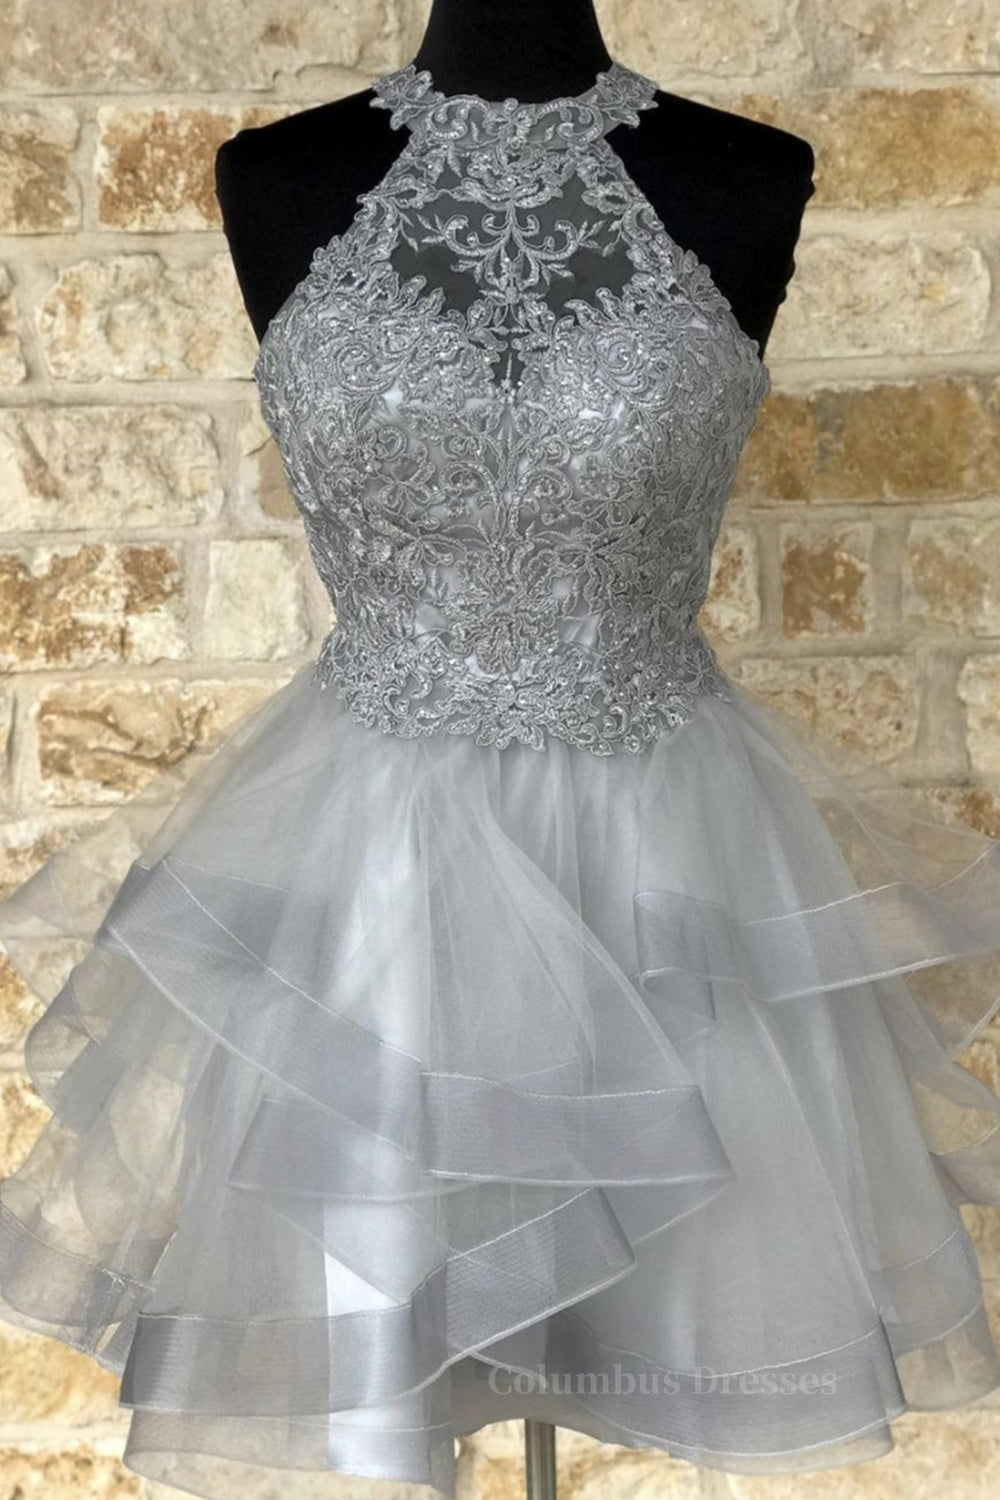 Party Dress Afternoon Tea, Gray Lace Short Prom Dresses, Fluffy Gray Lace Homecoming Dresses, Gray Formal Evening Dresses